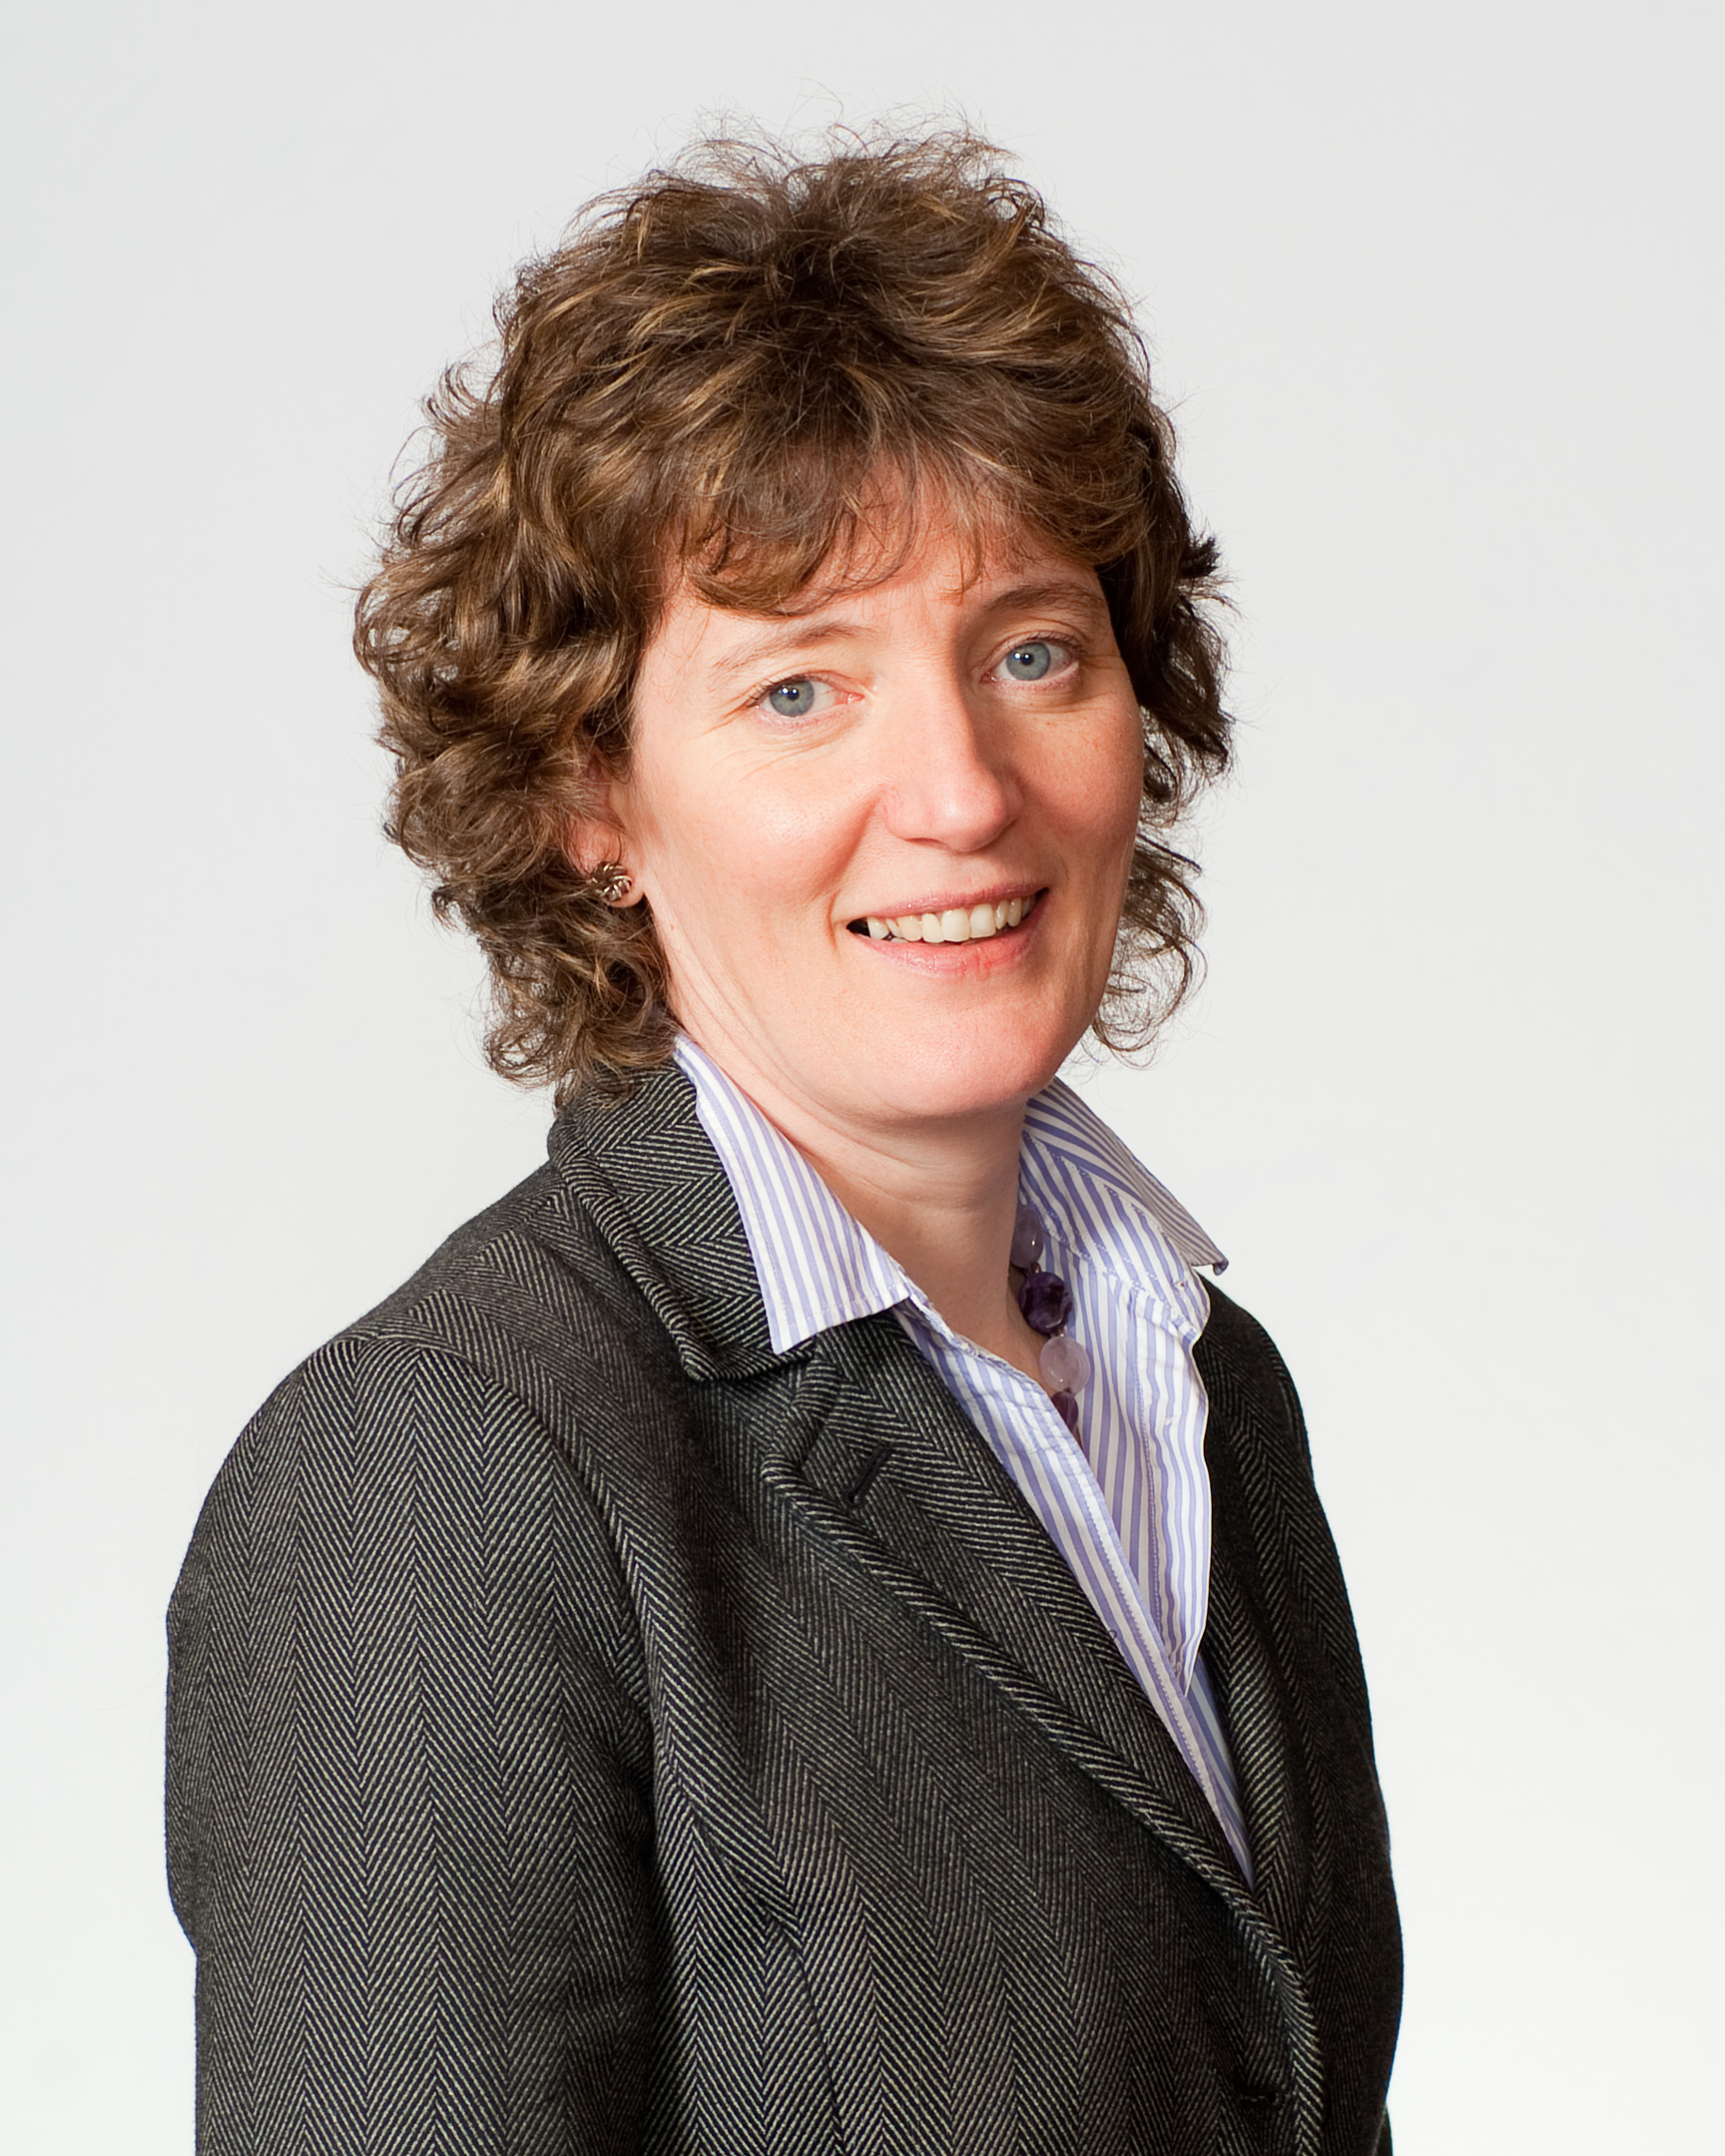 Chief executive of the National Trust for Scotland, Kate Mavor